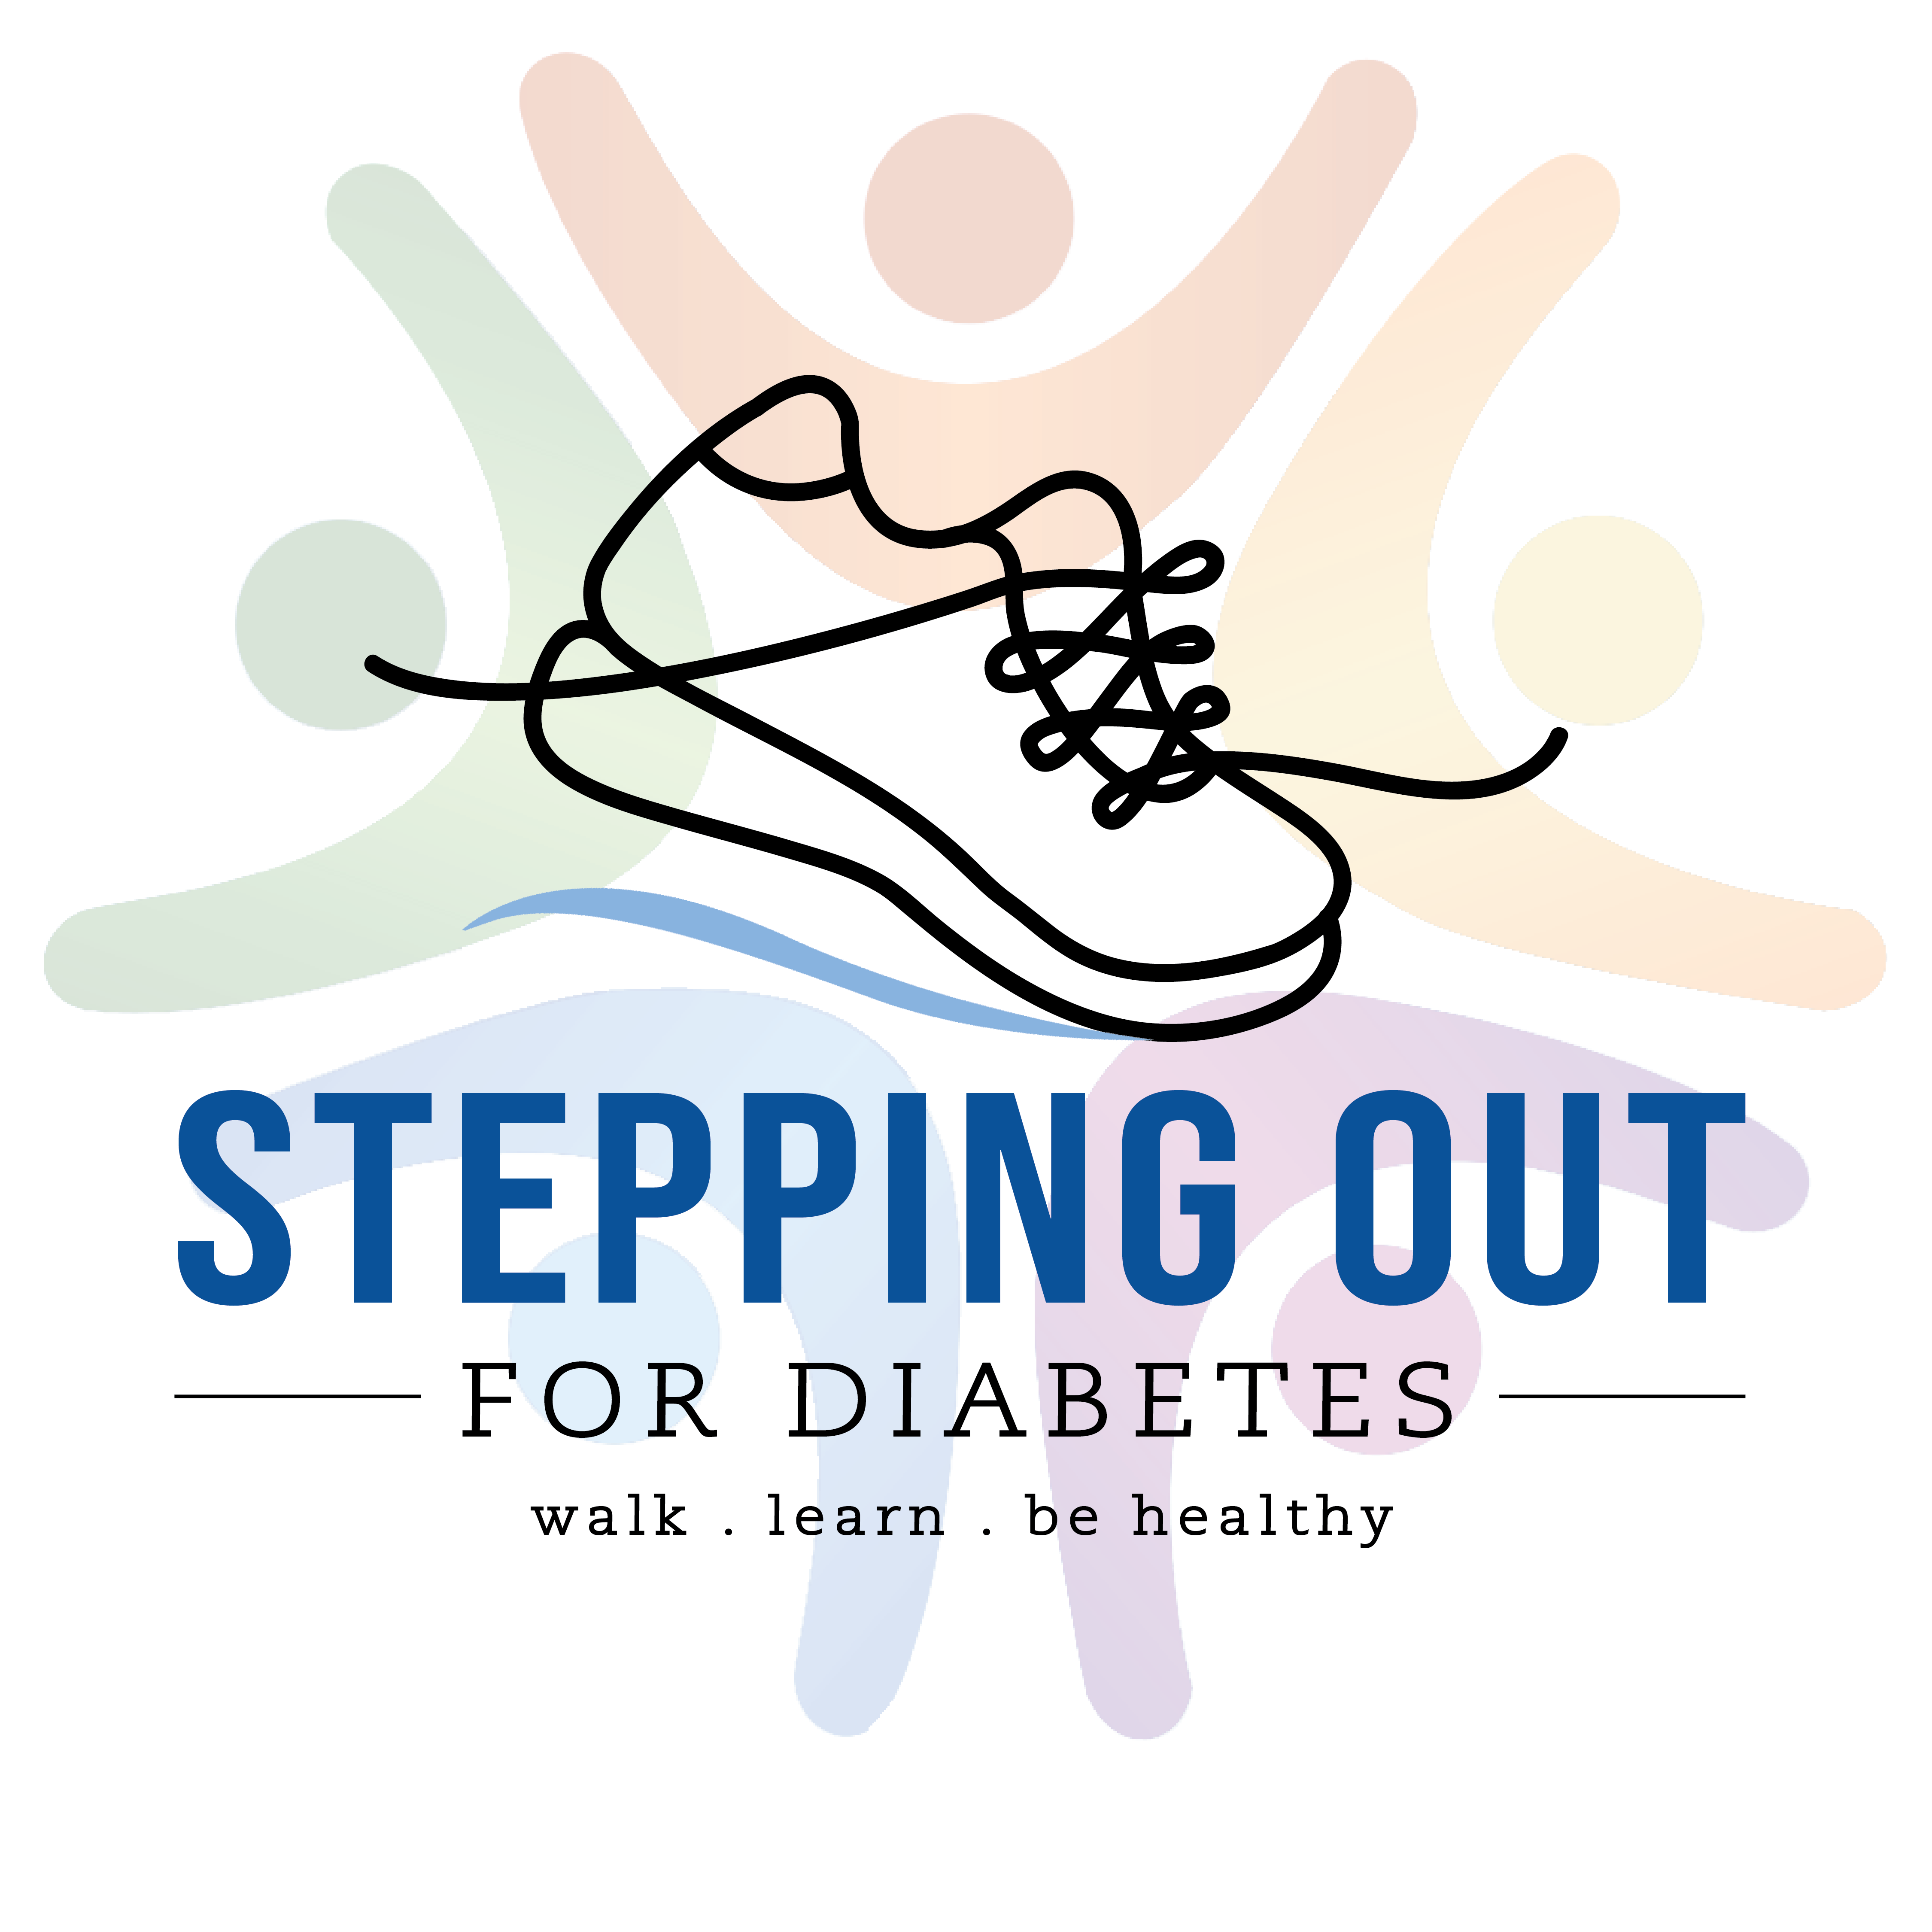 Stepping Out for Diabetes: Walk, Learn, Be Healthy